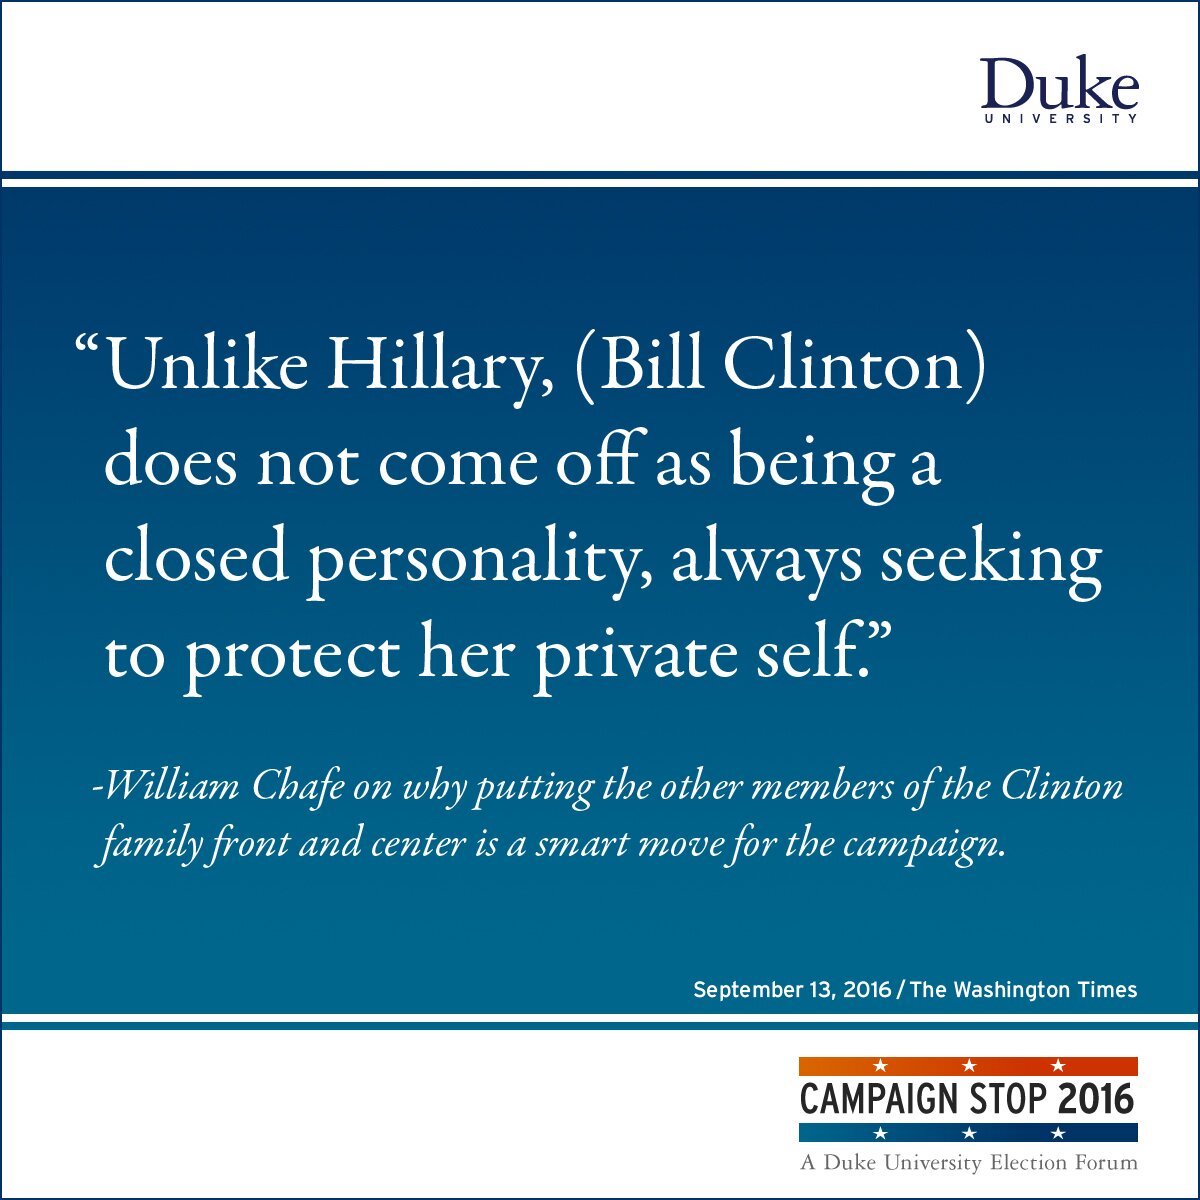 “Unlike Hillary, (Bill Clinton) does not come off as being a closed personality, always seeking to protect her private self.” -William Chafe on why putting the other members of the Clinton family front and center is a smart move for the campaign.